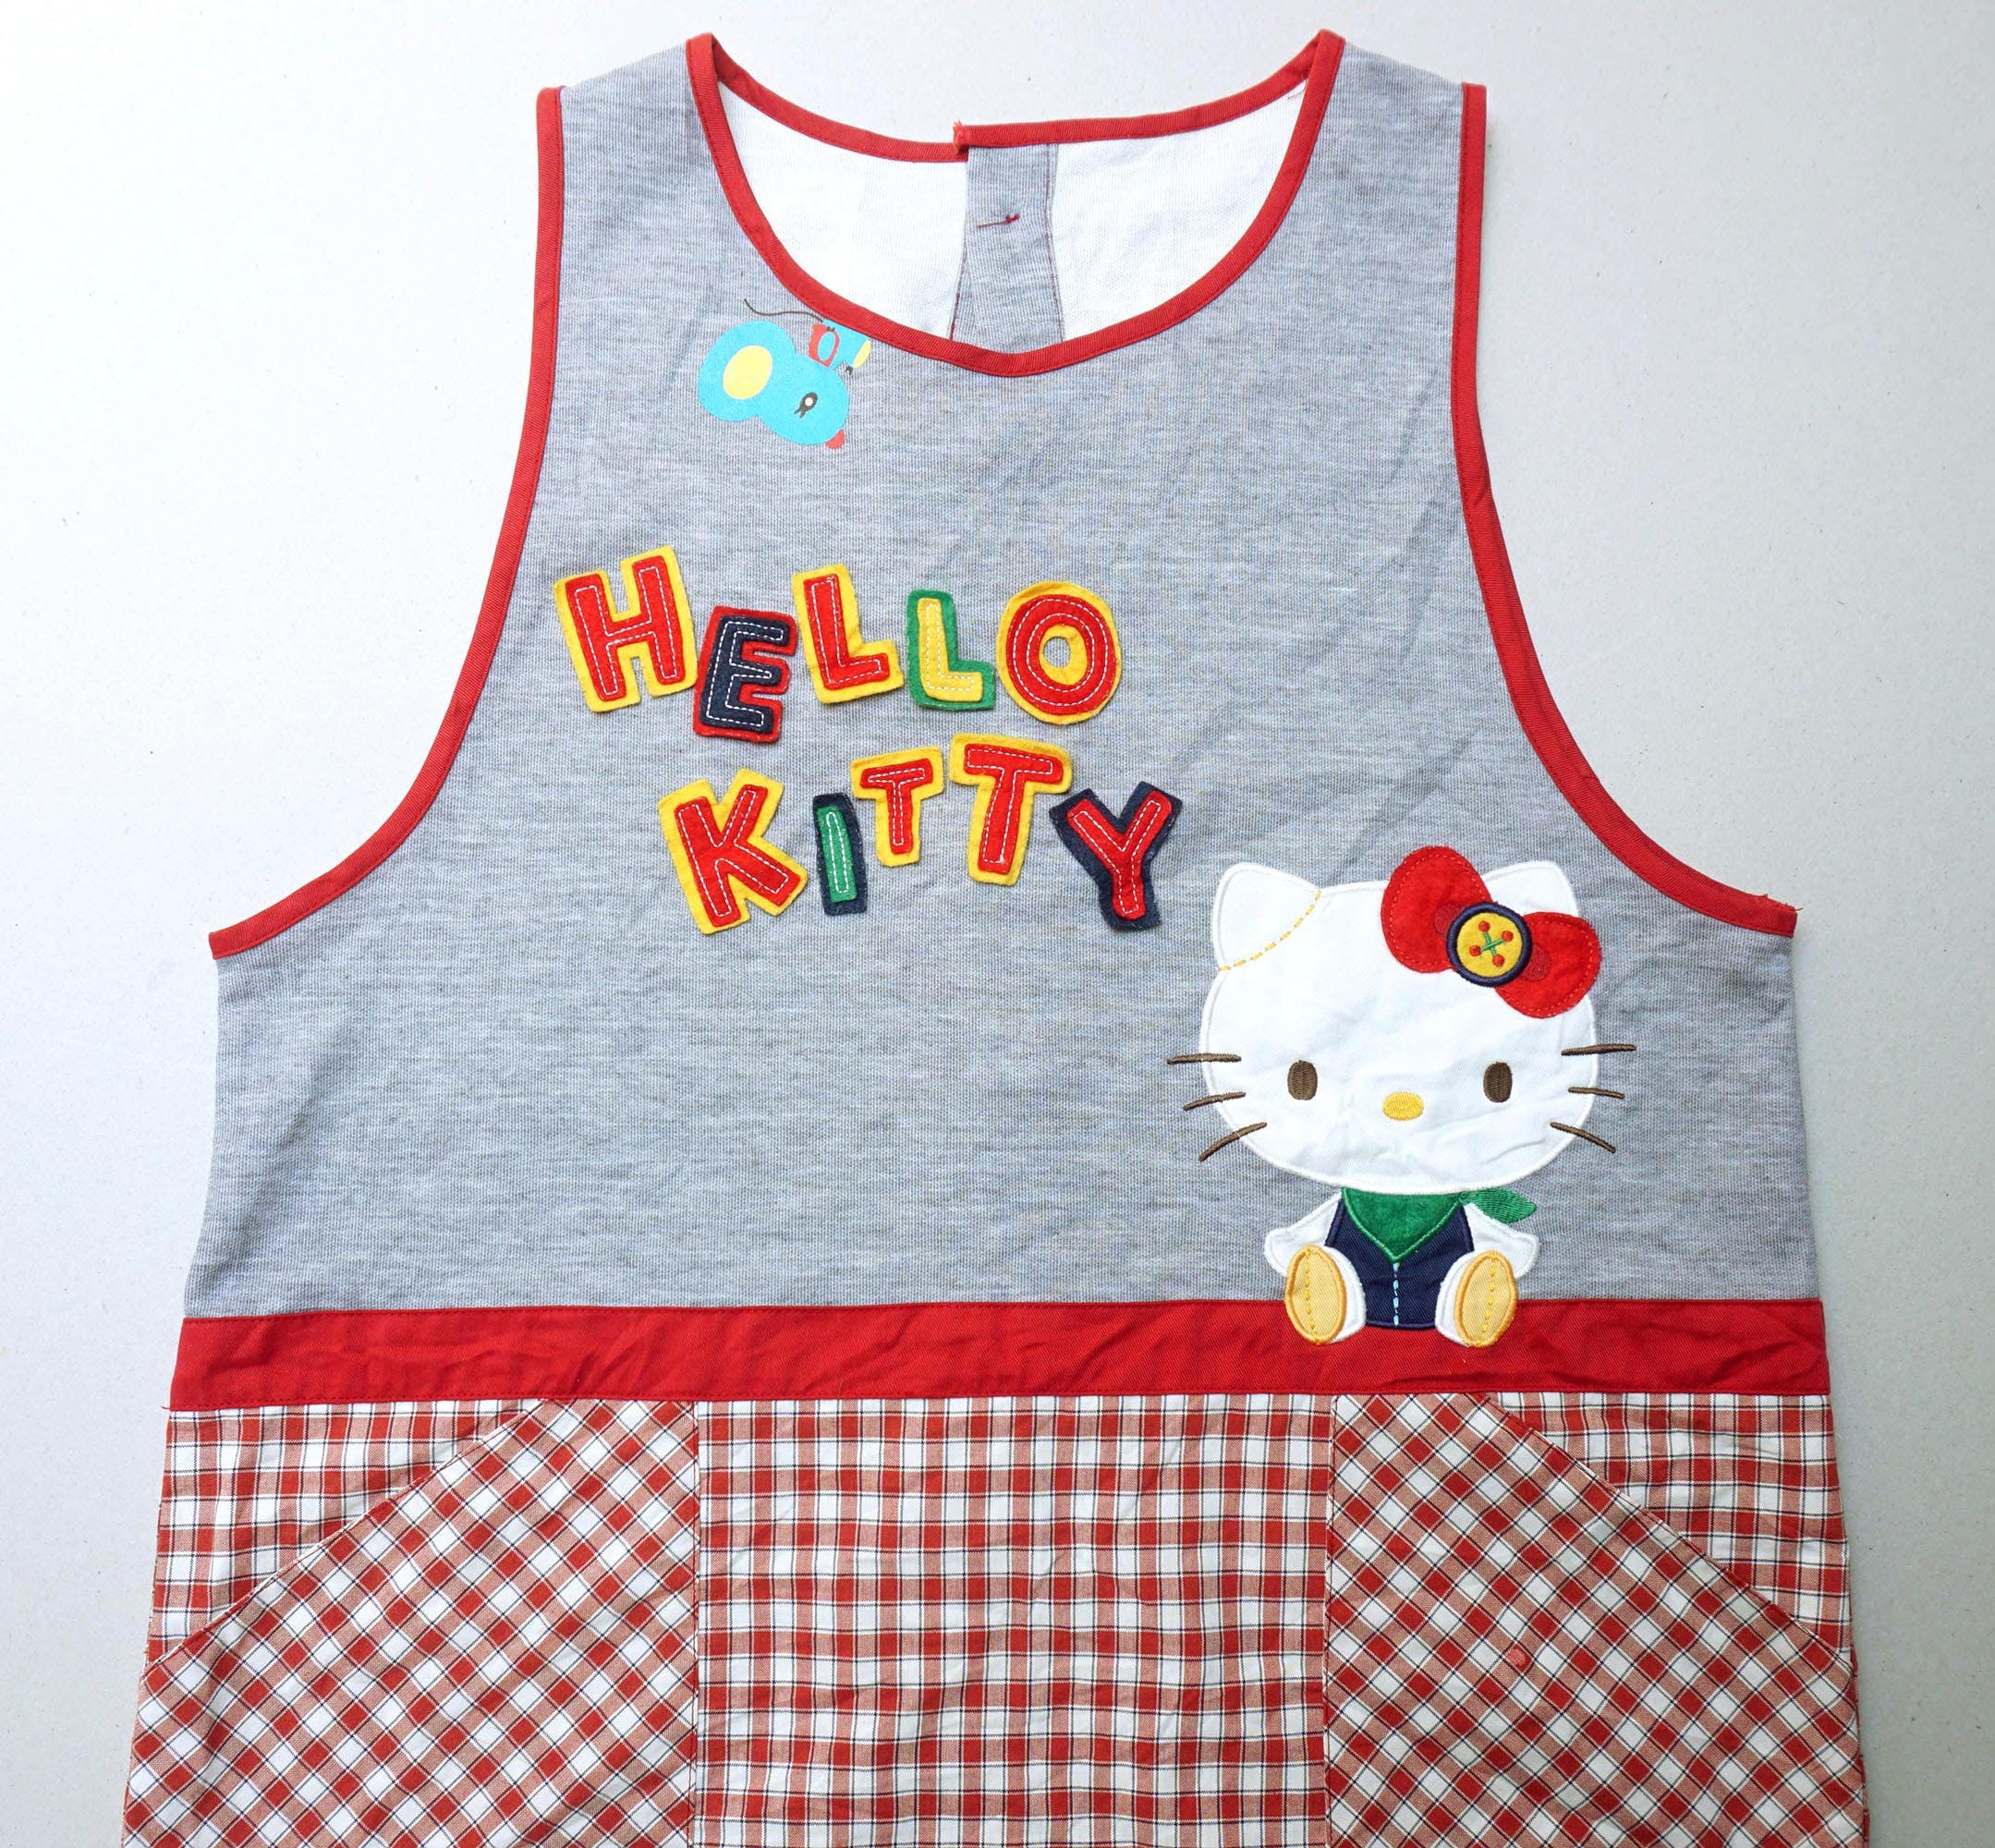 Japanese Brand - HELLO KITTY Patchwork & Checkered Apron - 1